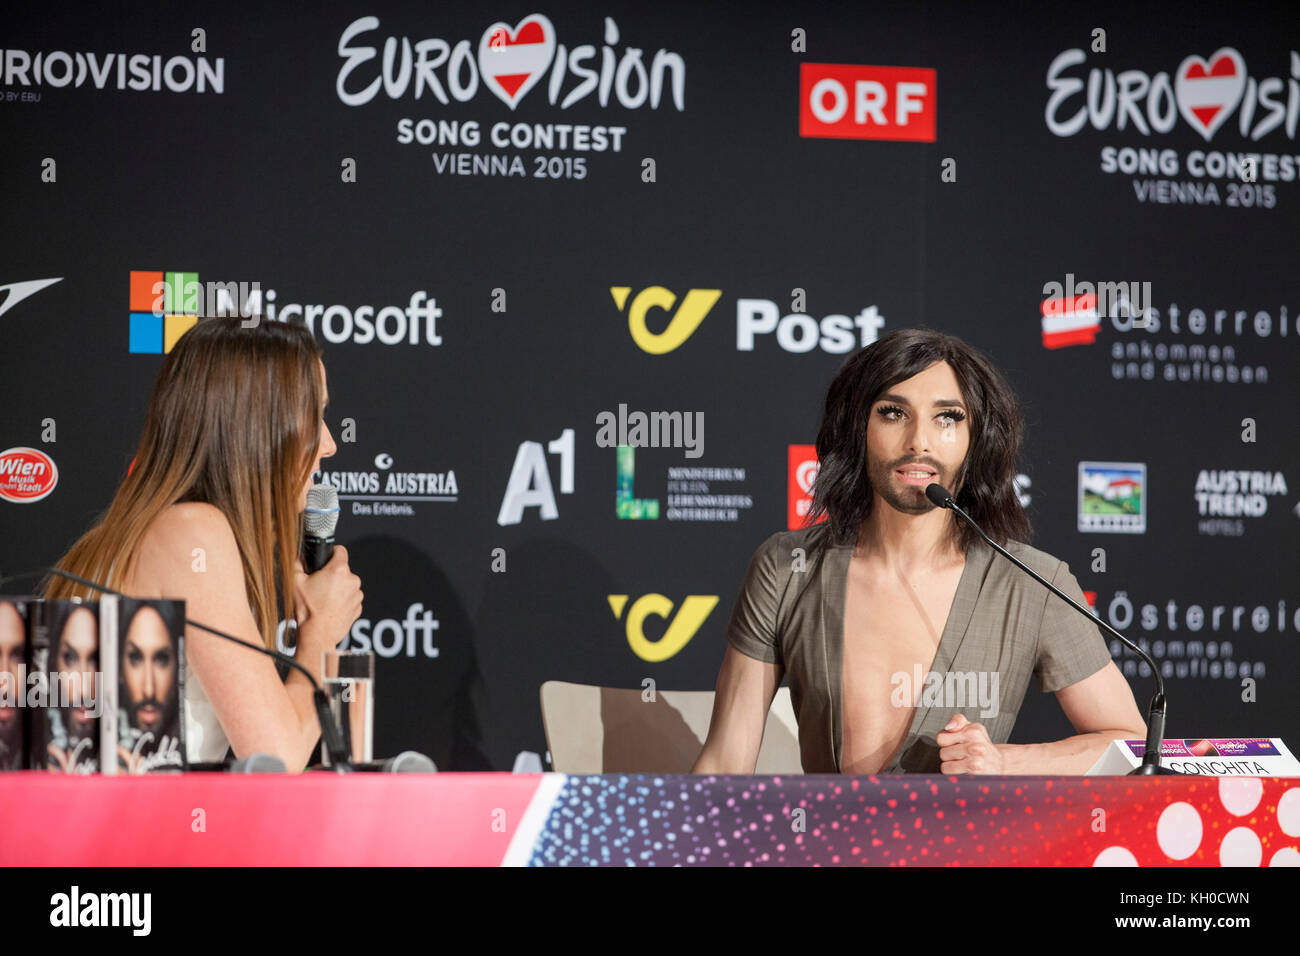 The 2014 Eurovision Song Contest winner Conchita Wurst speaks at her own press conference today in the Wiener Stadthalle (Gonzales Photo/Michael Hornbogen). Stock Photo